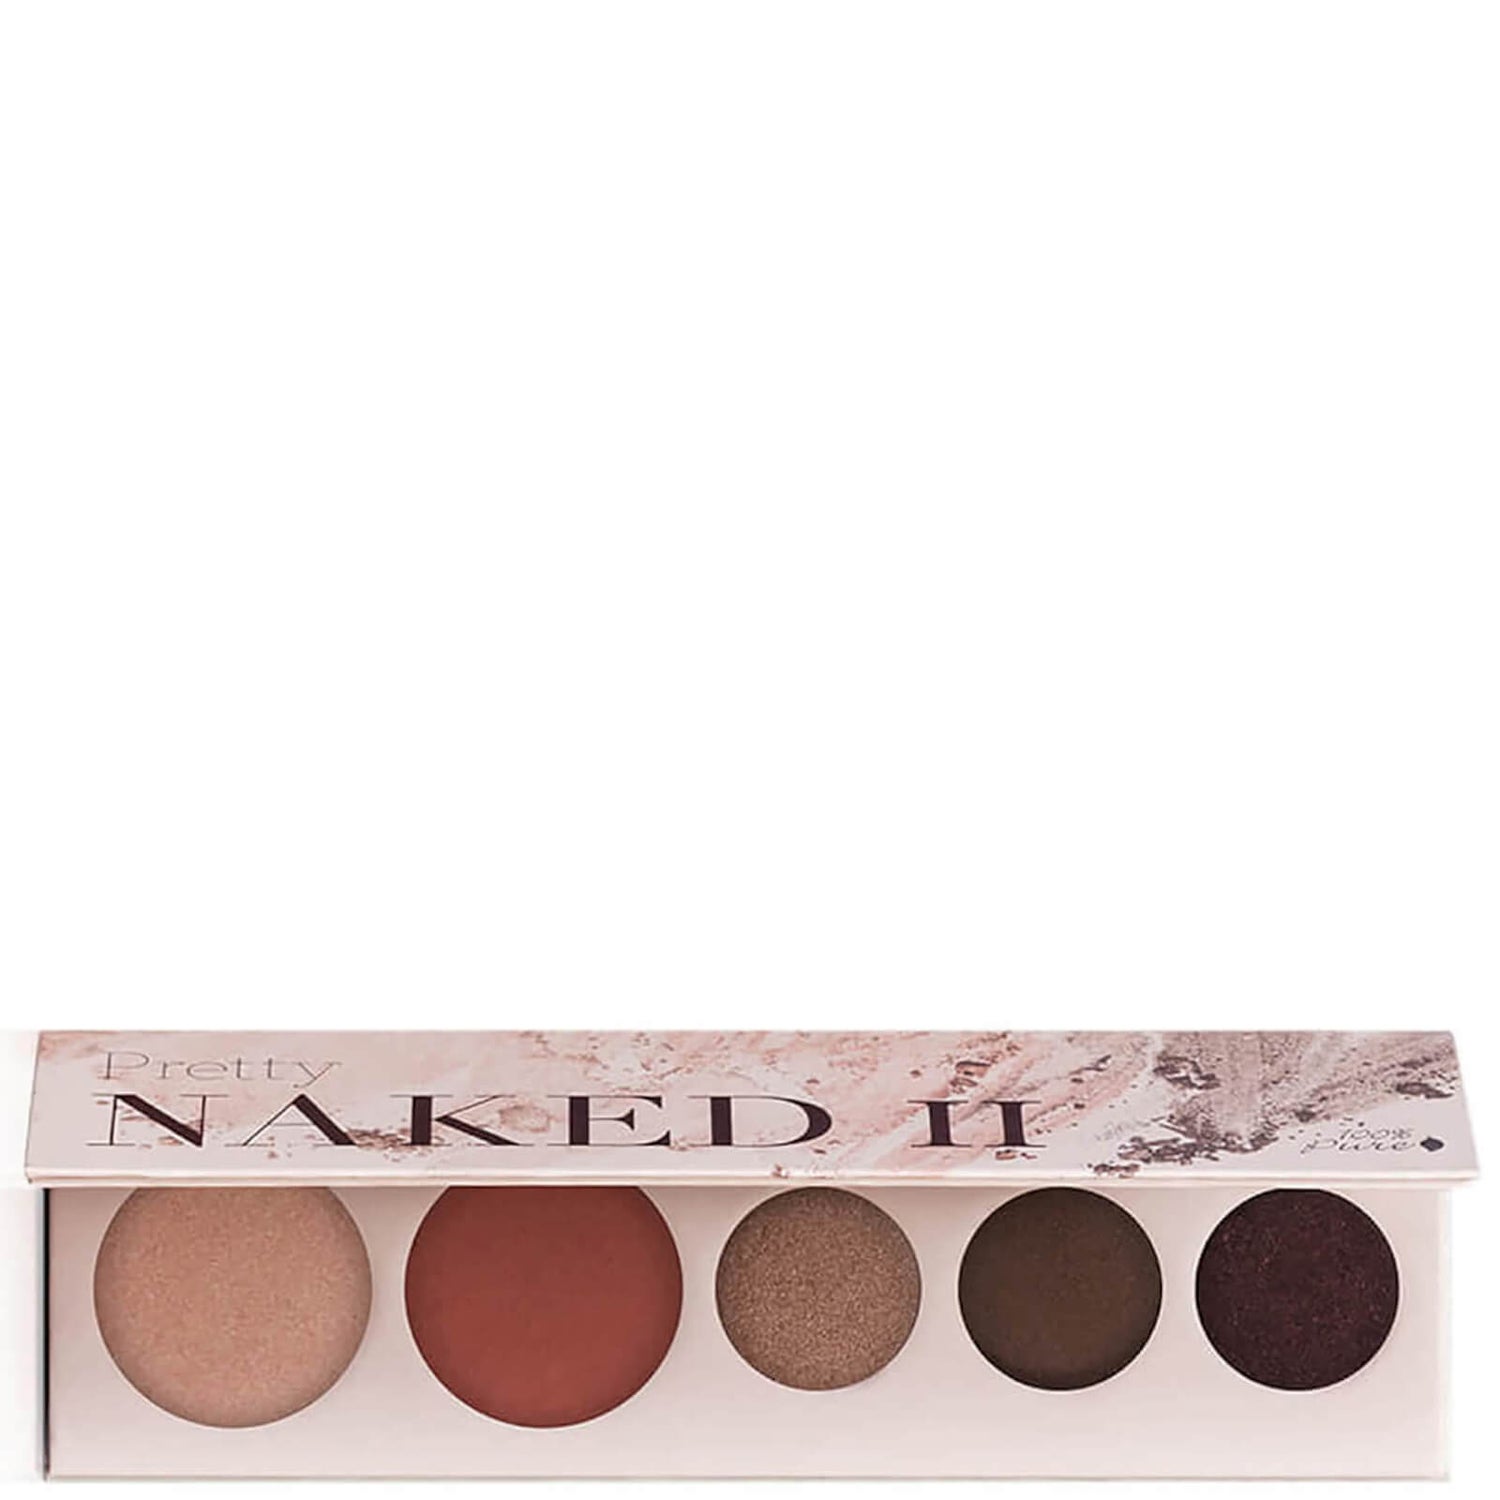 100% Pure Fruit Pigmented Pretty Naked Palette II (1 piece)